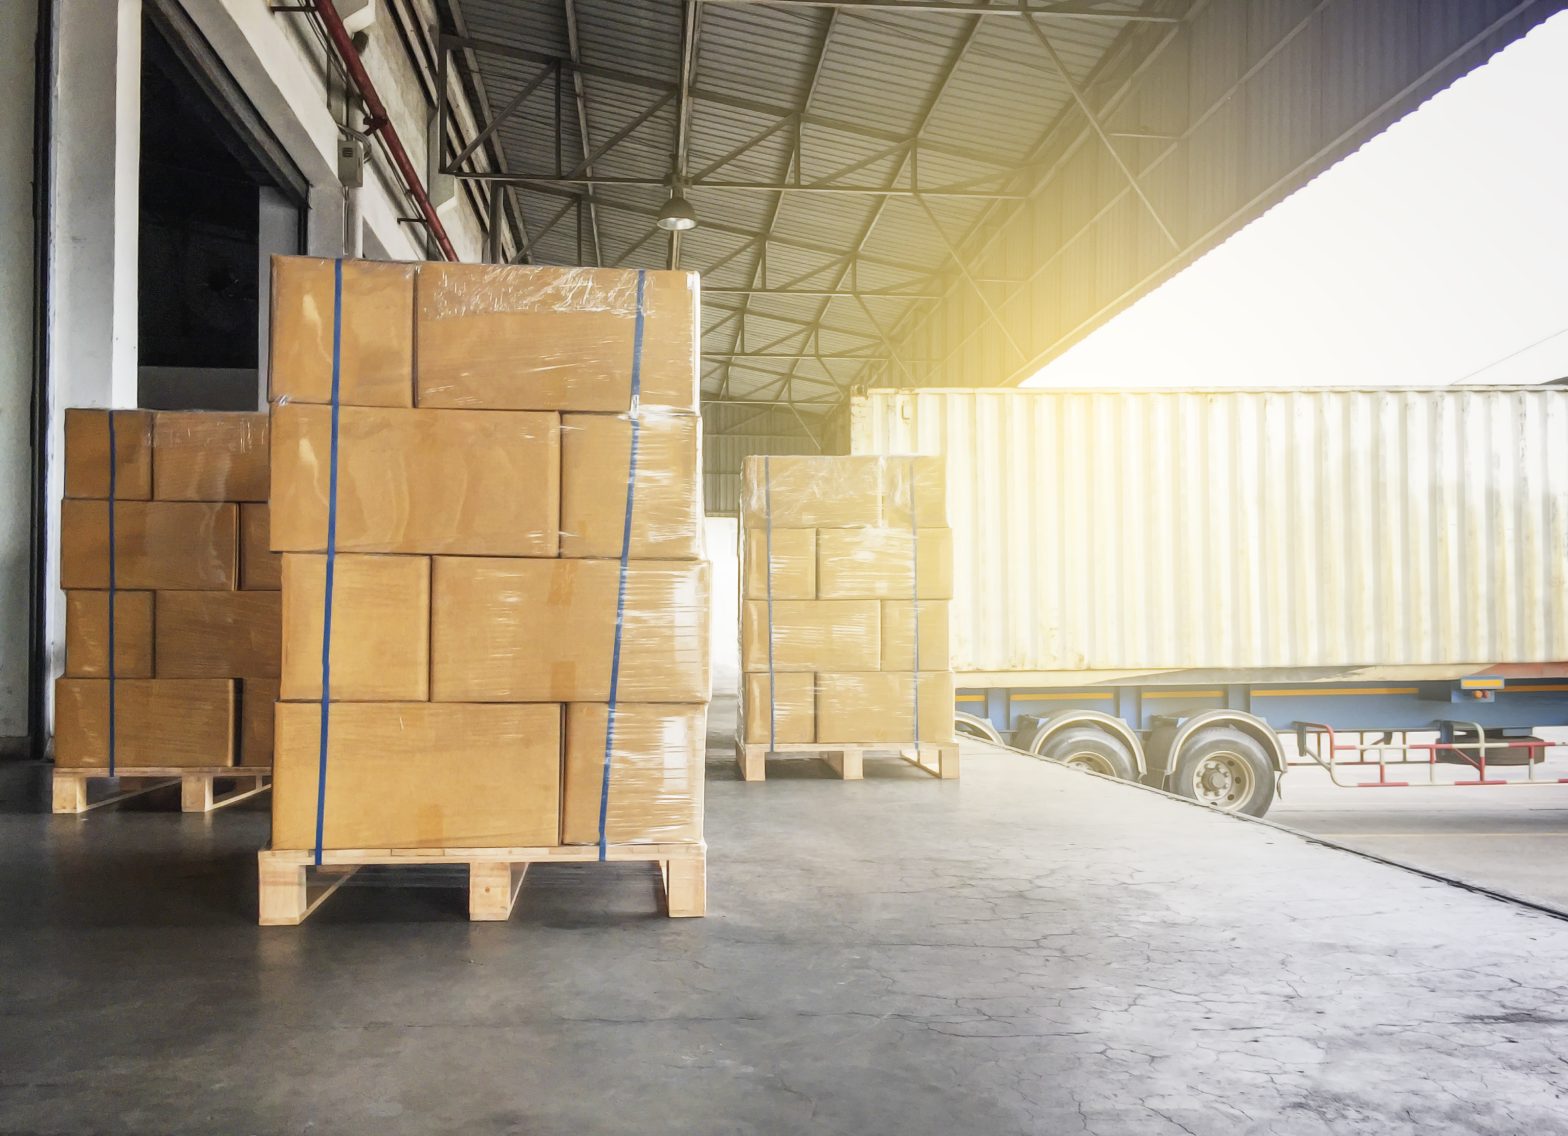 Warehouse cargo courier shipment. Stack of cardboard boxes on wooden pallet and truck docking at warehouse